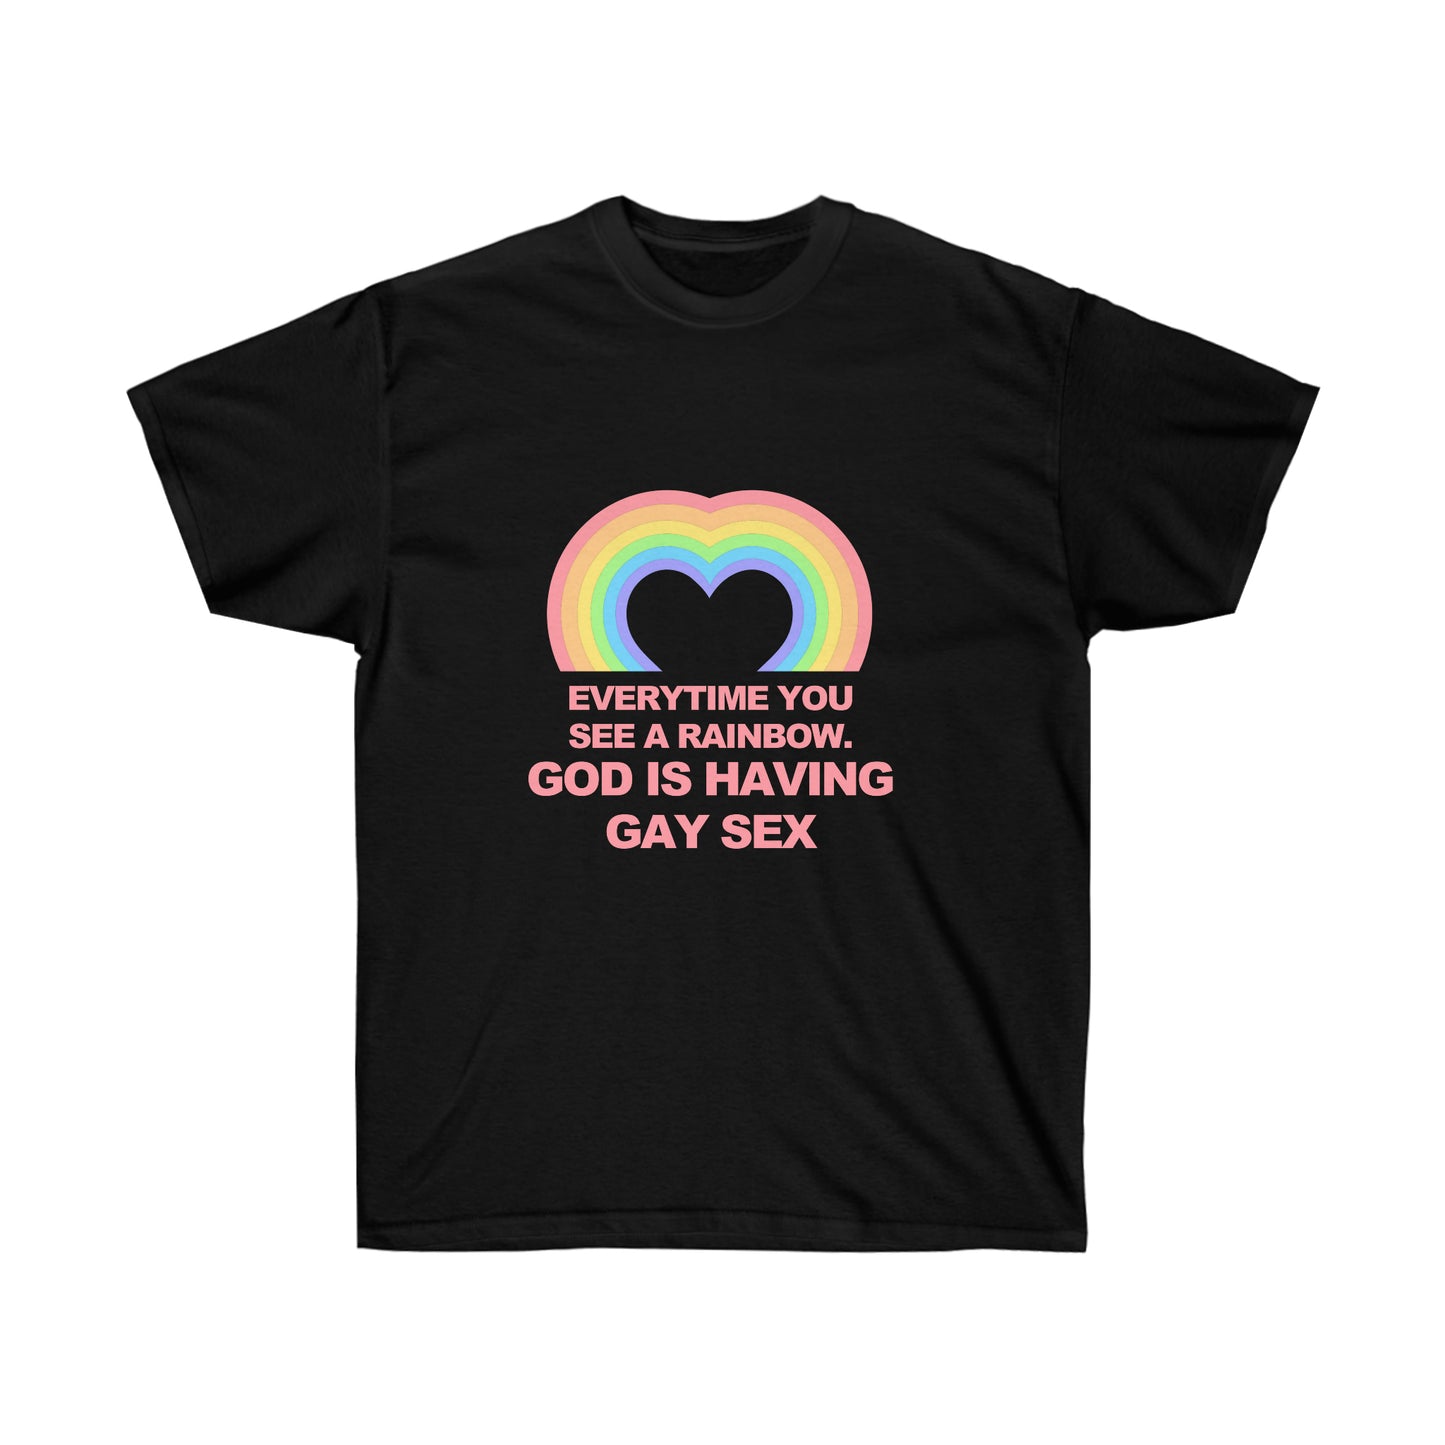 Everytime you see a rainbow, god is having gay sex T-Shirt